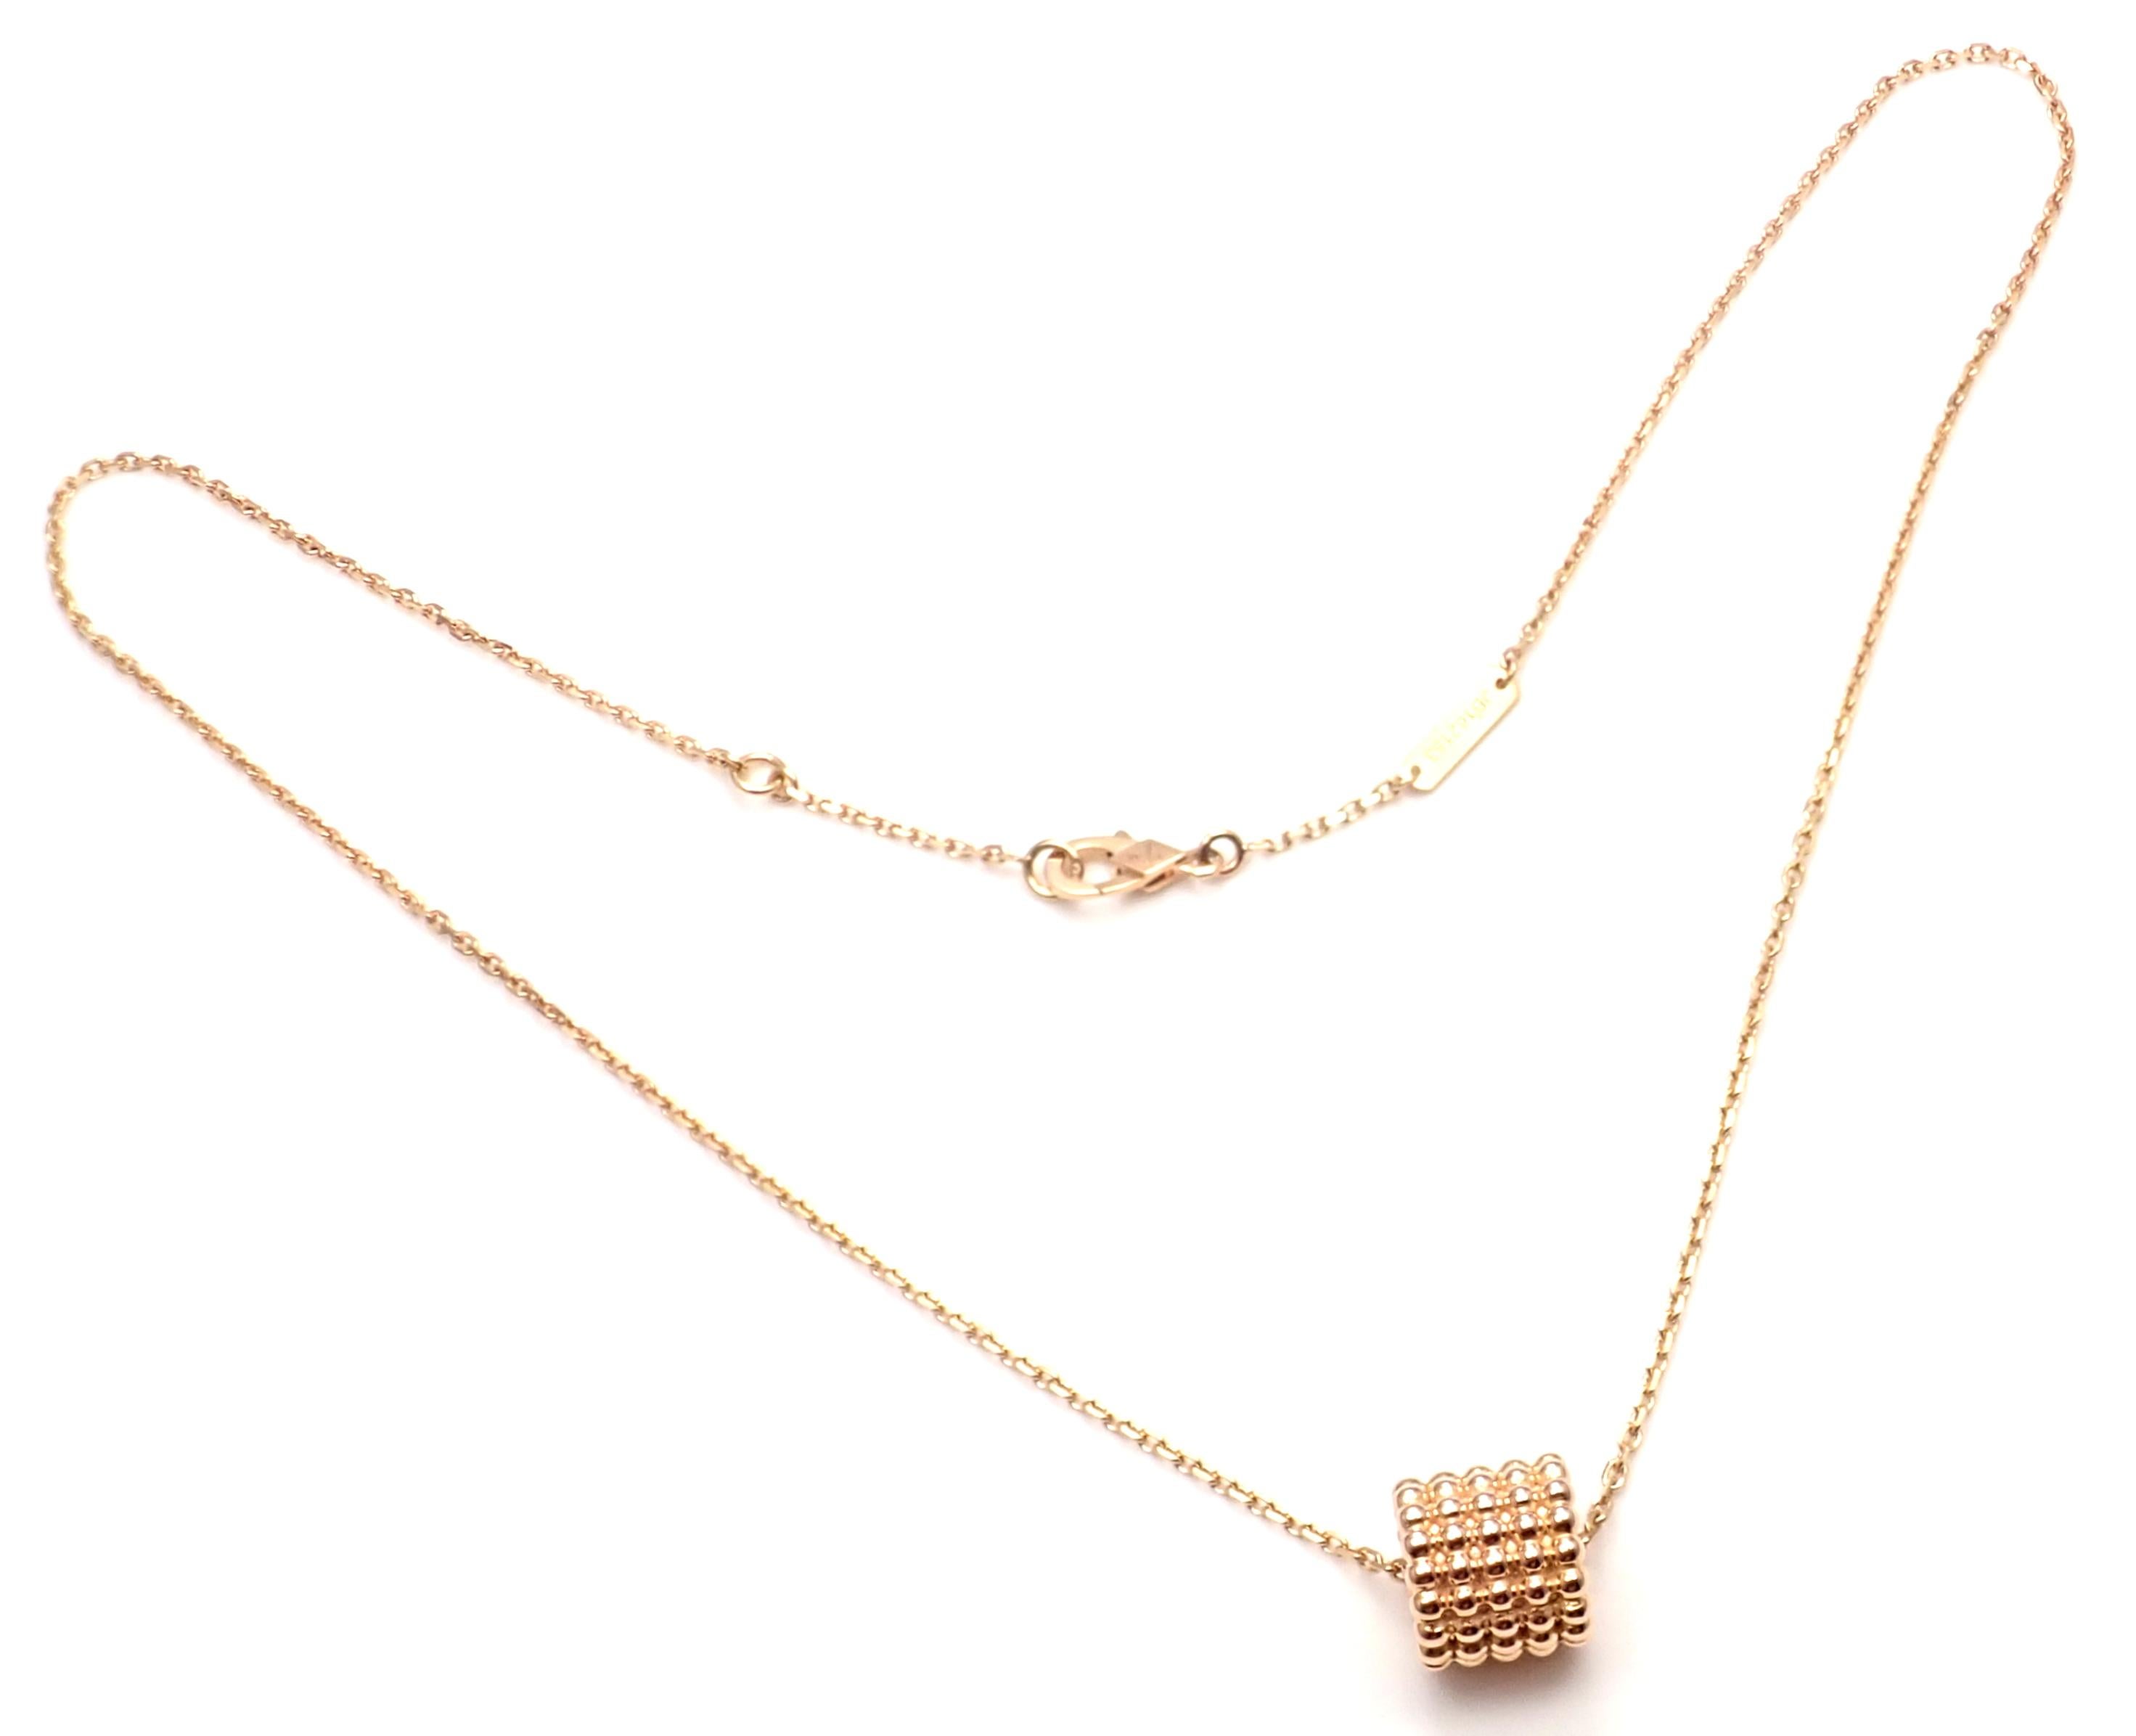 18k Rose Gold 5 Rows Perlee Pendant Necklace by Van Cleef & Arpels. 
This necklace comes with 2 service papers from VCA store for the pendant and the chain.
Details: 
Length: 16.5